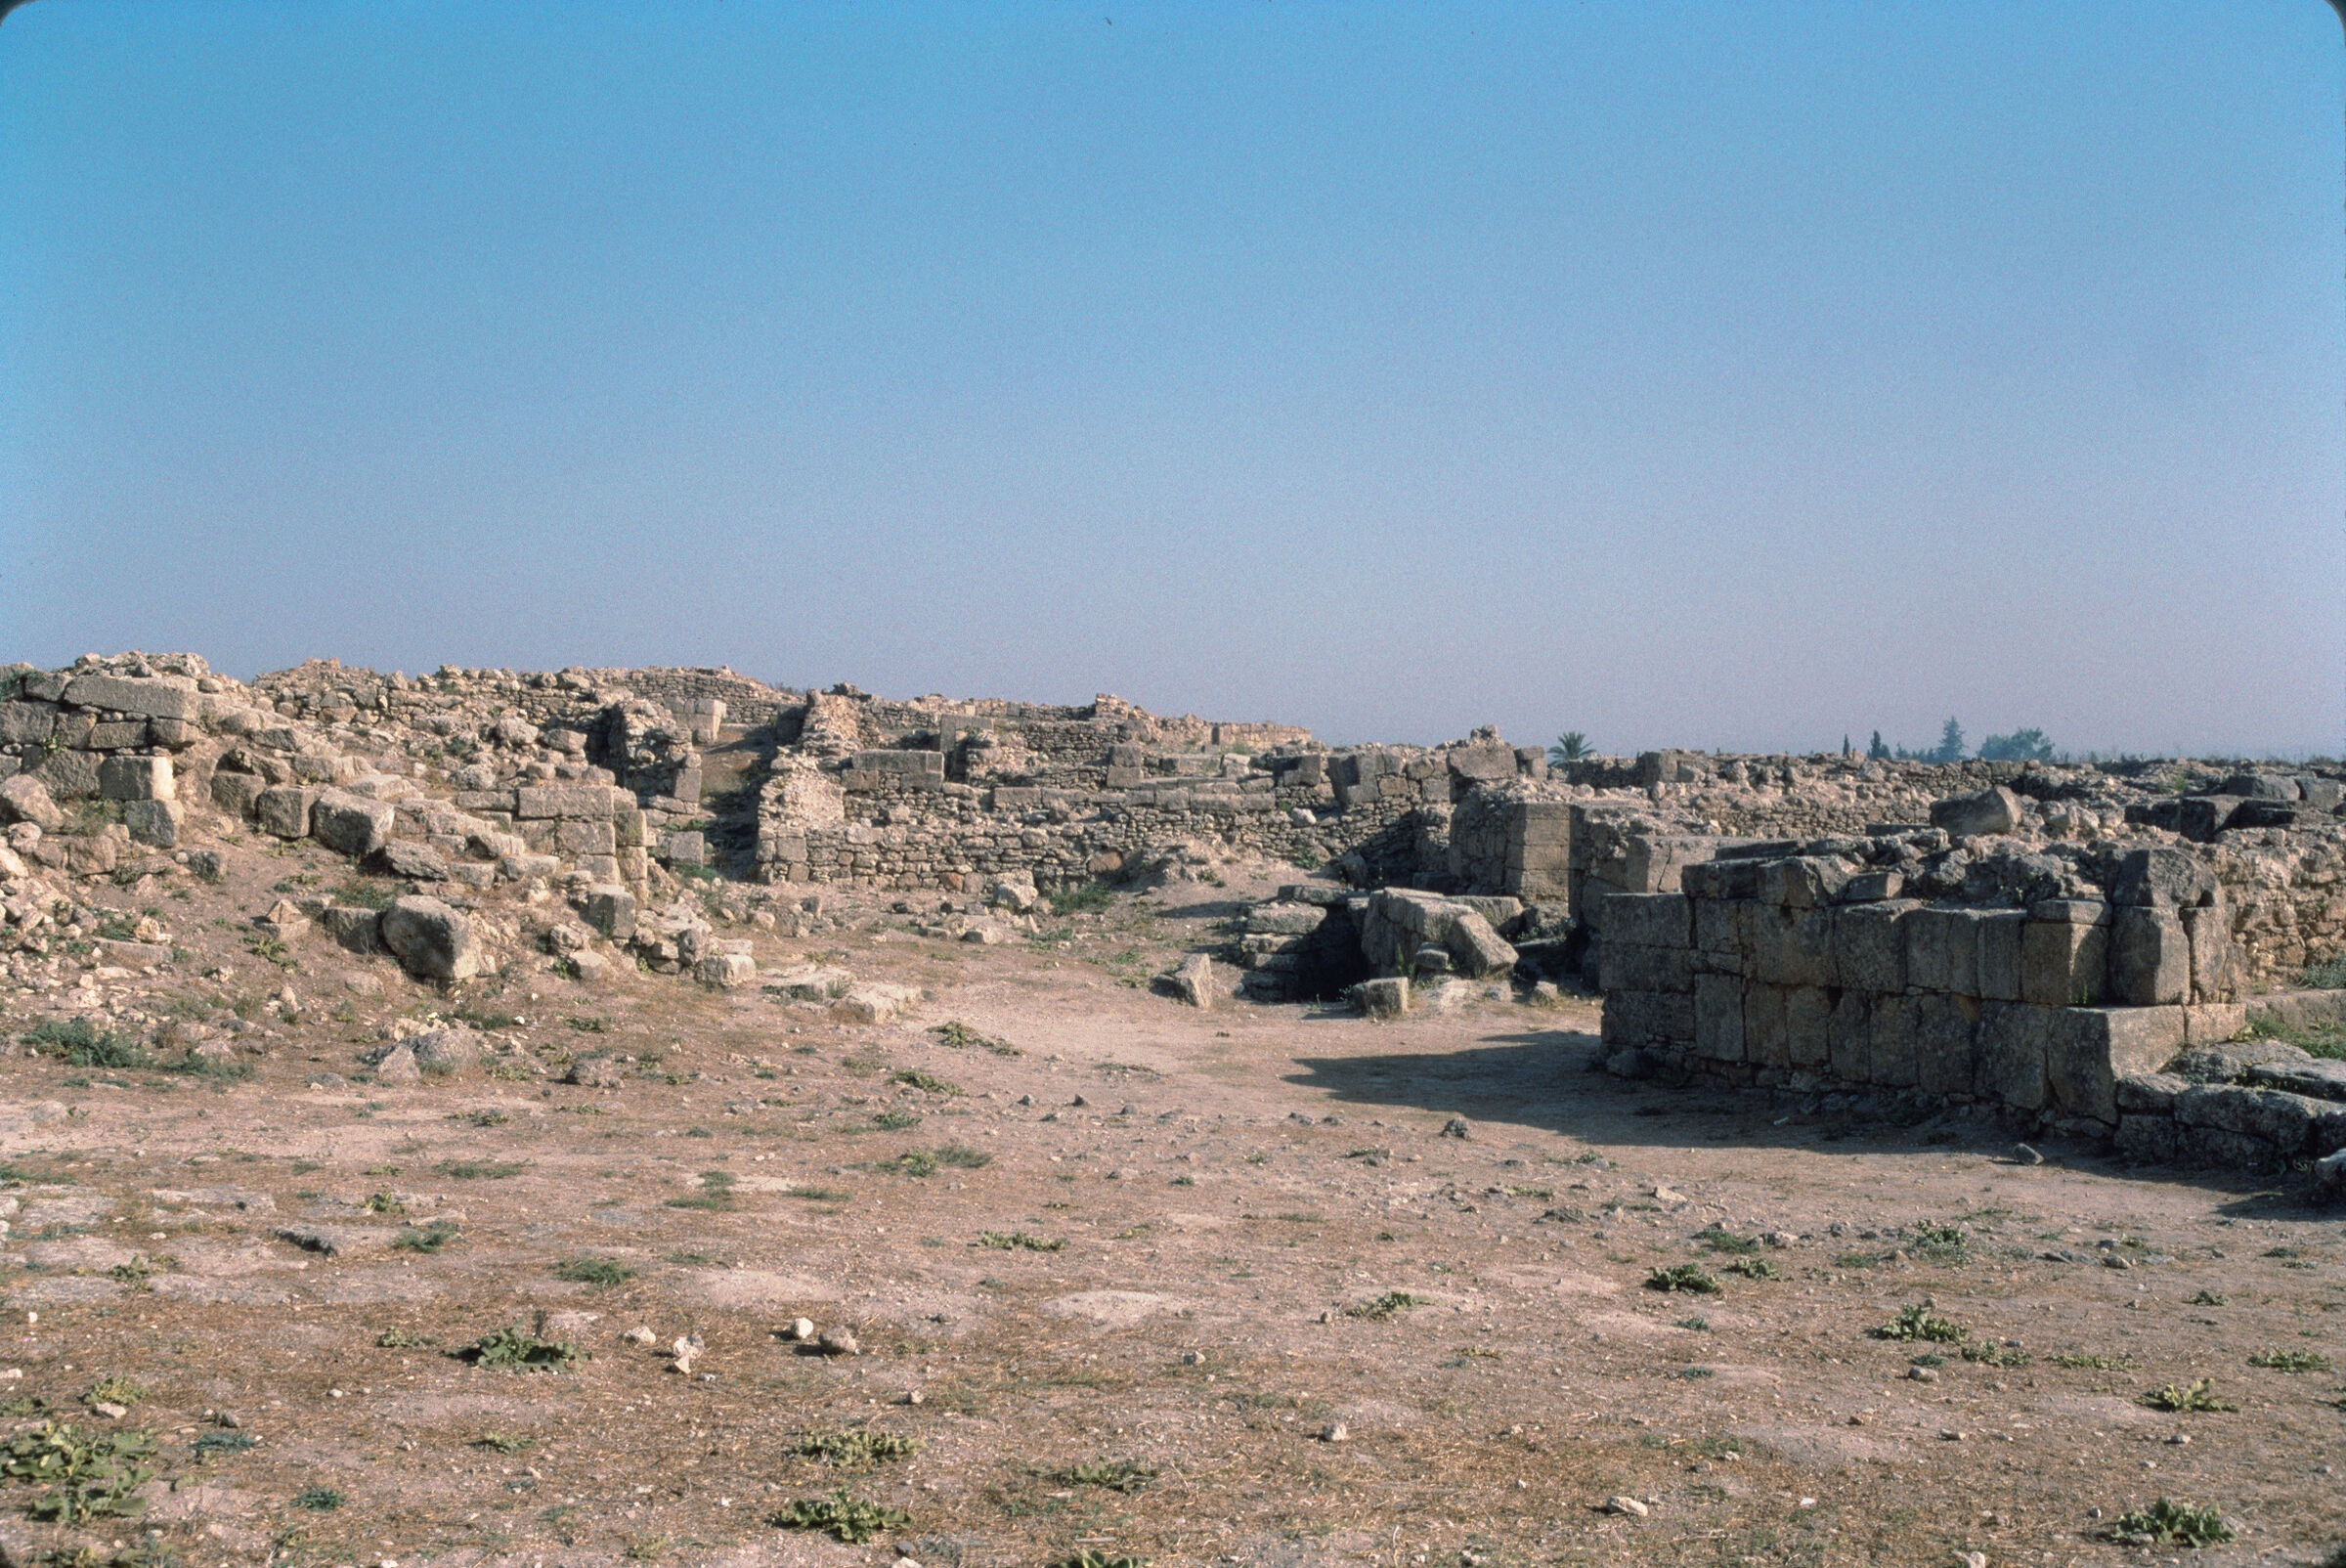 Overview of the ancient city of Ugarit, including remnants of buildings and fortification walls